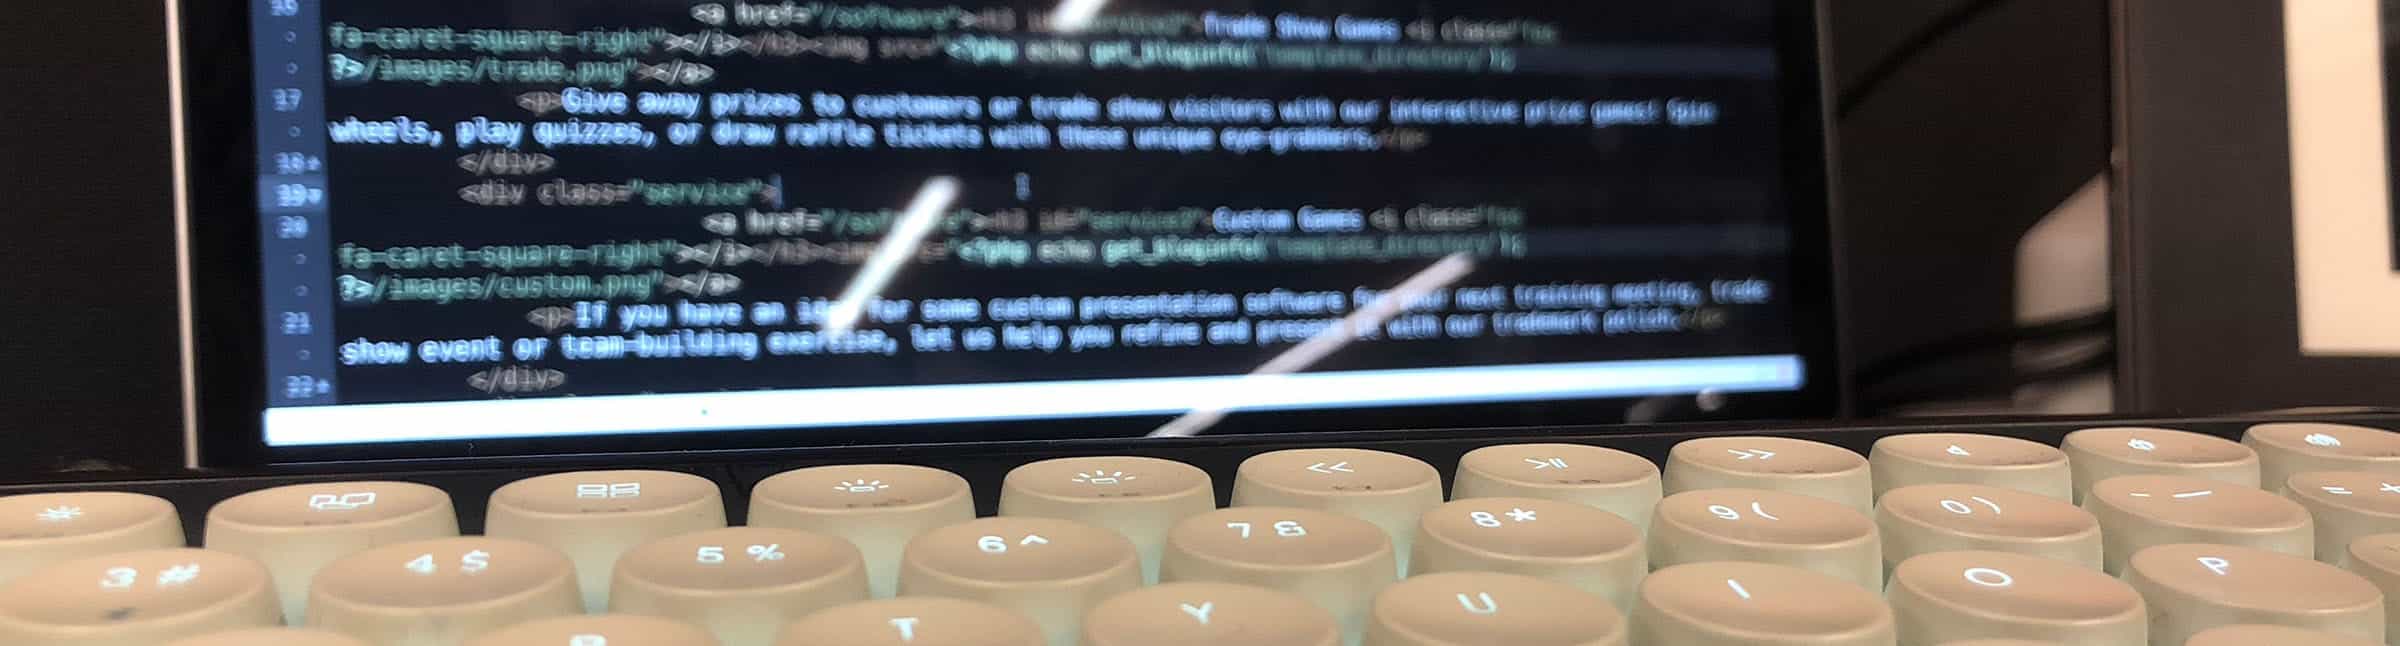 Image: A mechanical keyboard, with HTML code blurred in the background.